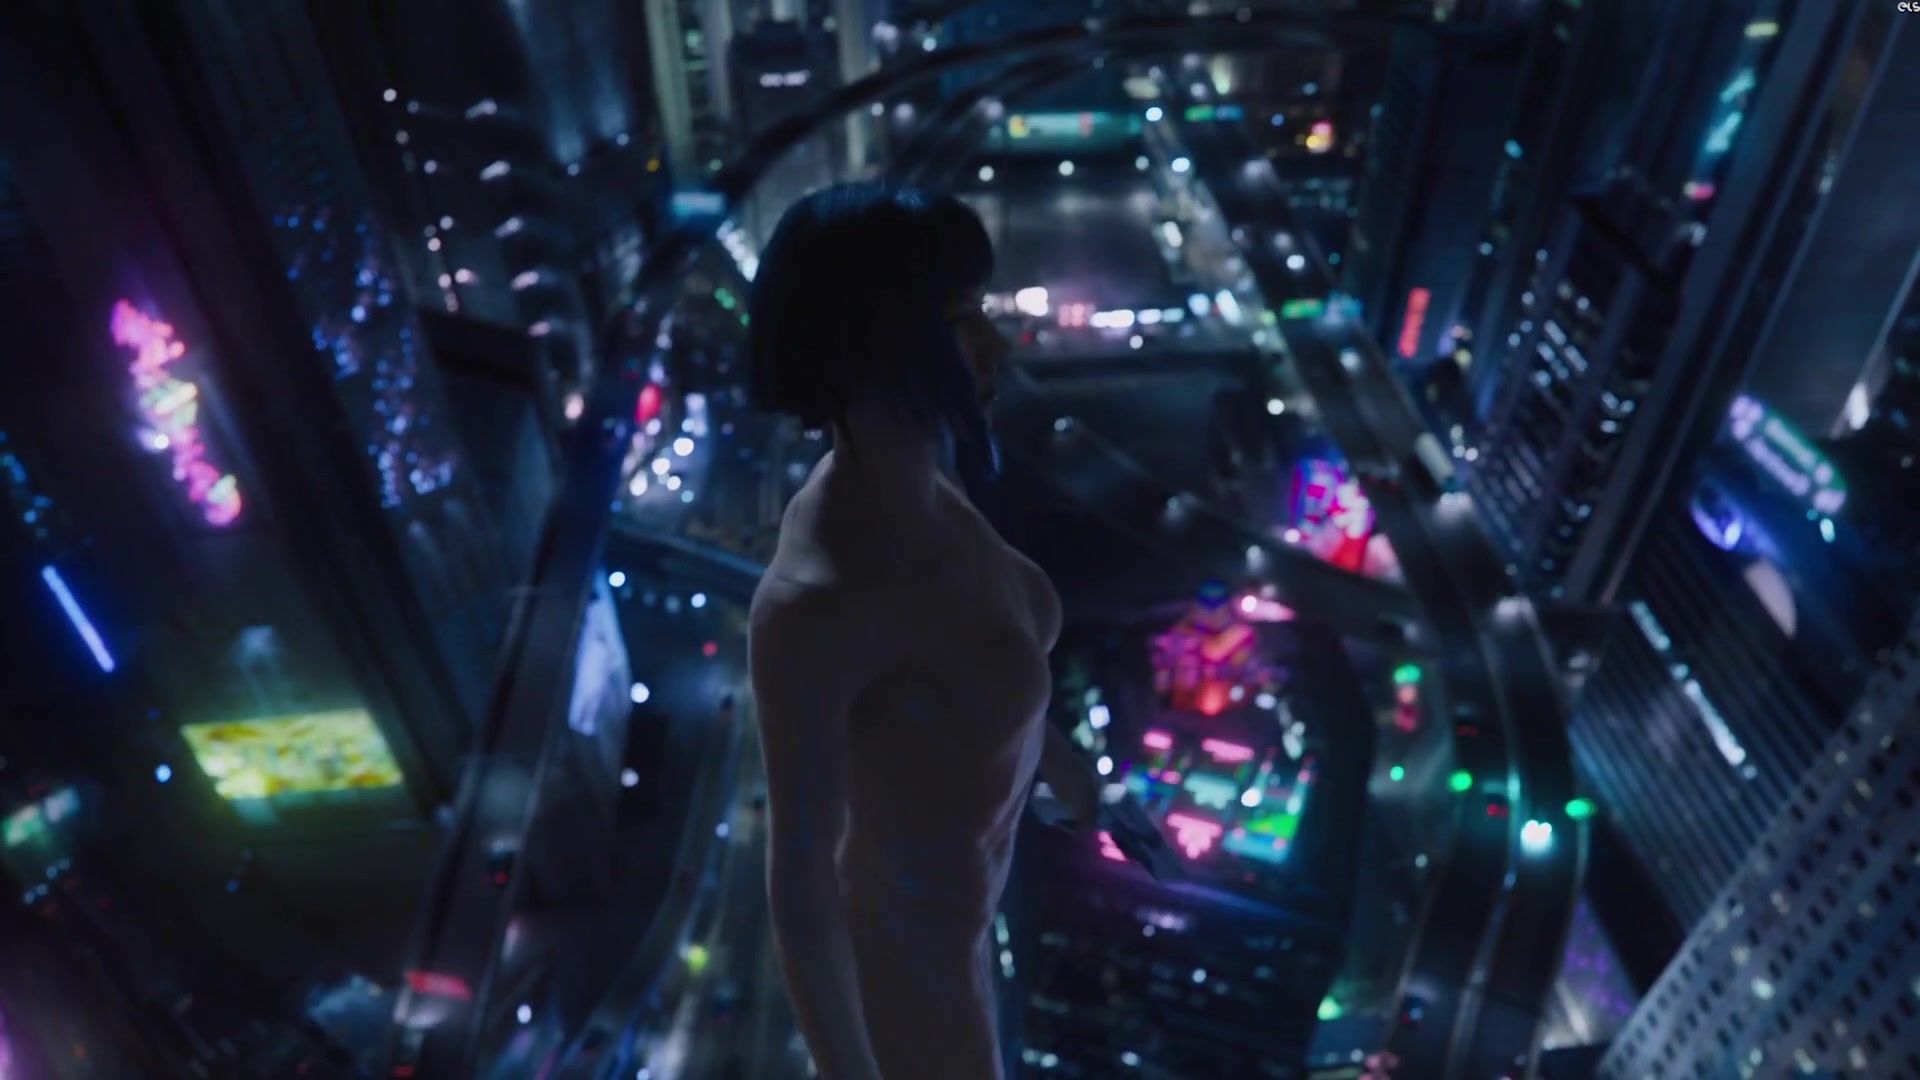 Gay Hairy Scarlett Johansson nude - Ghost in the Shell (2017) Site-Rip - 2